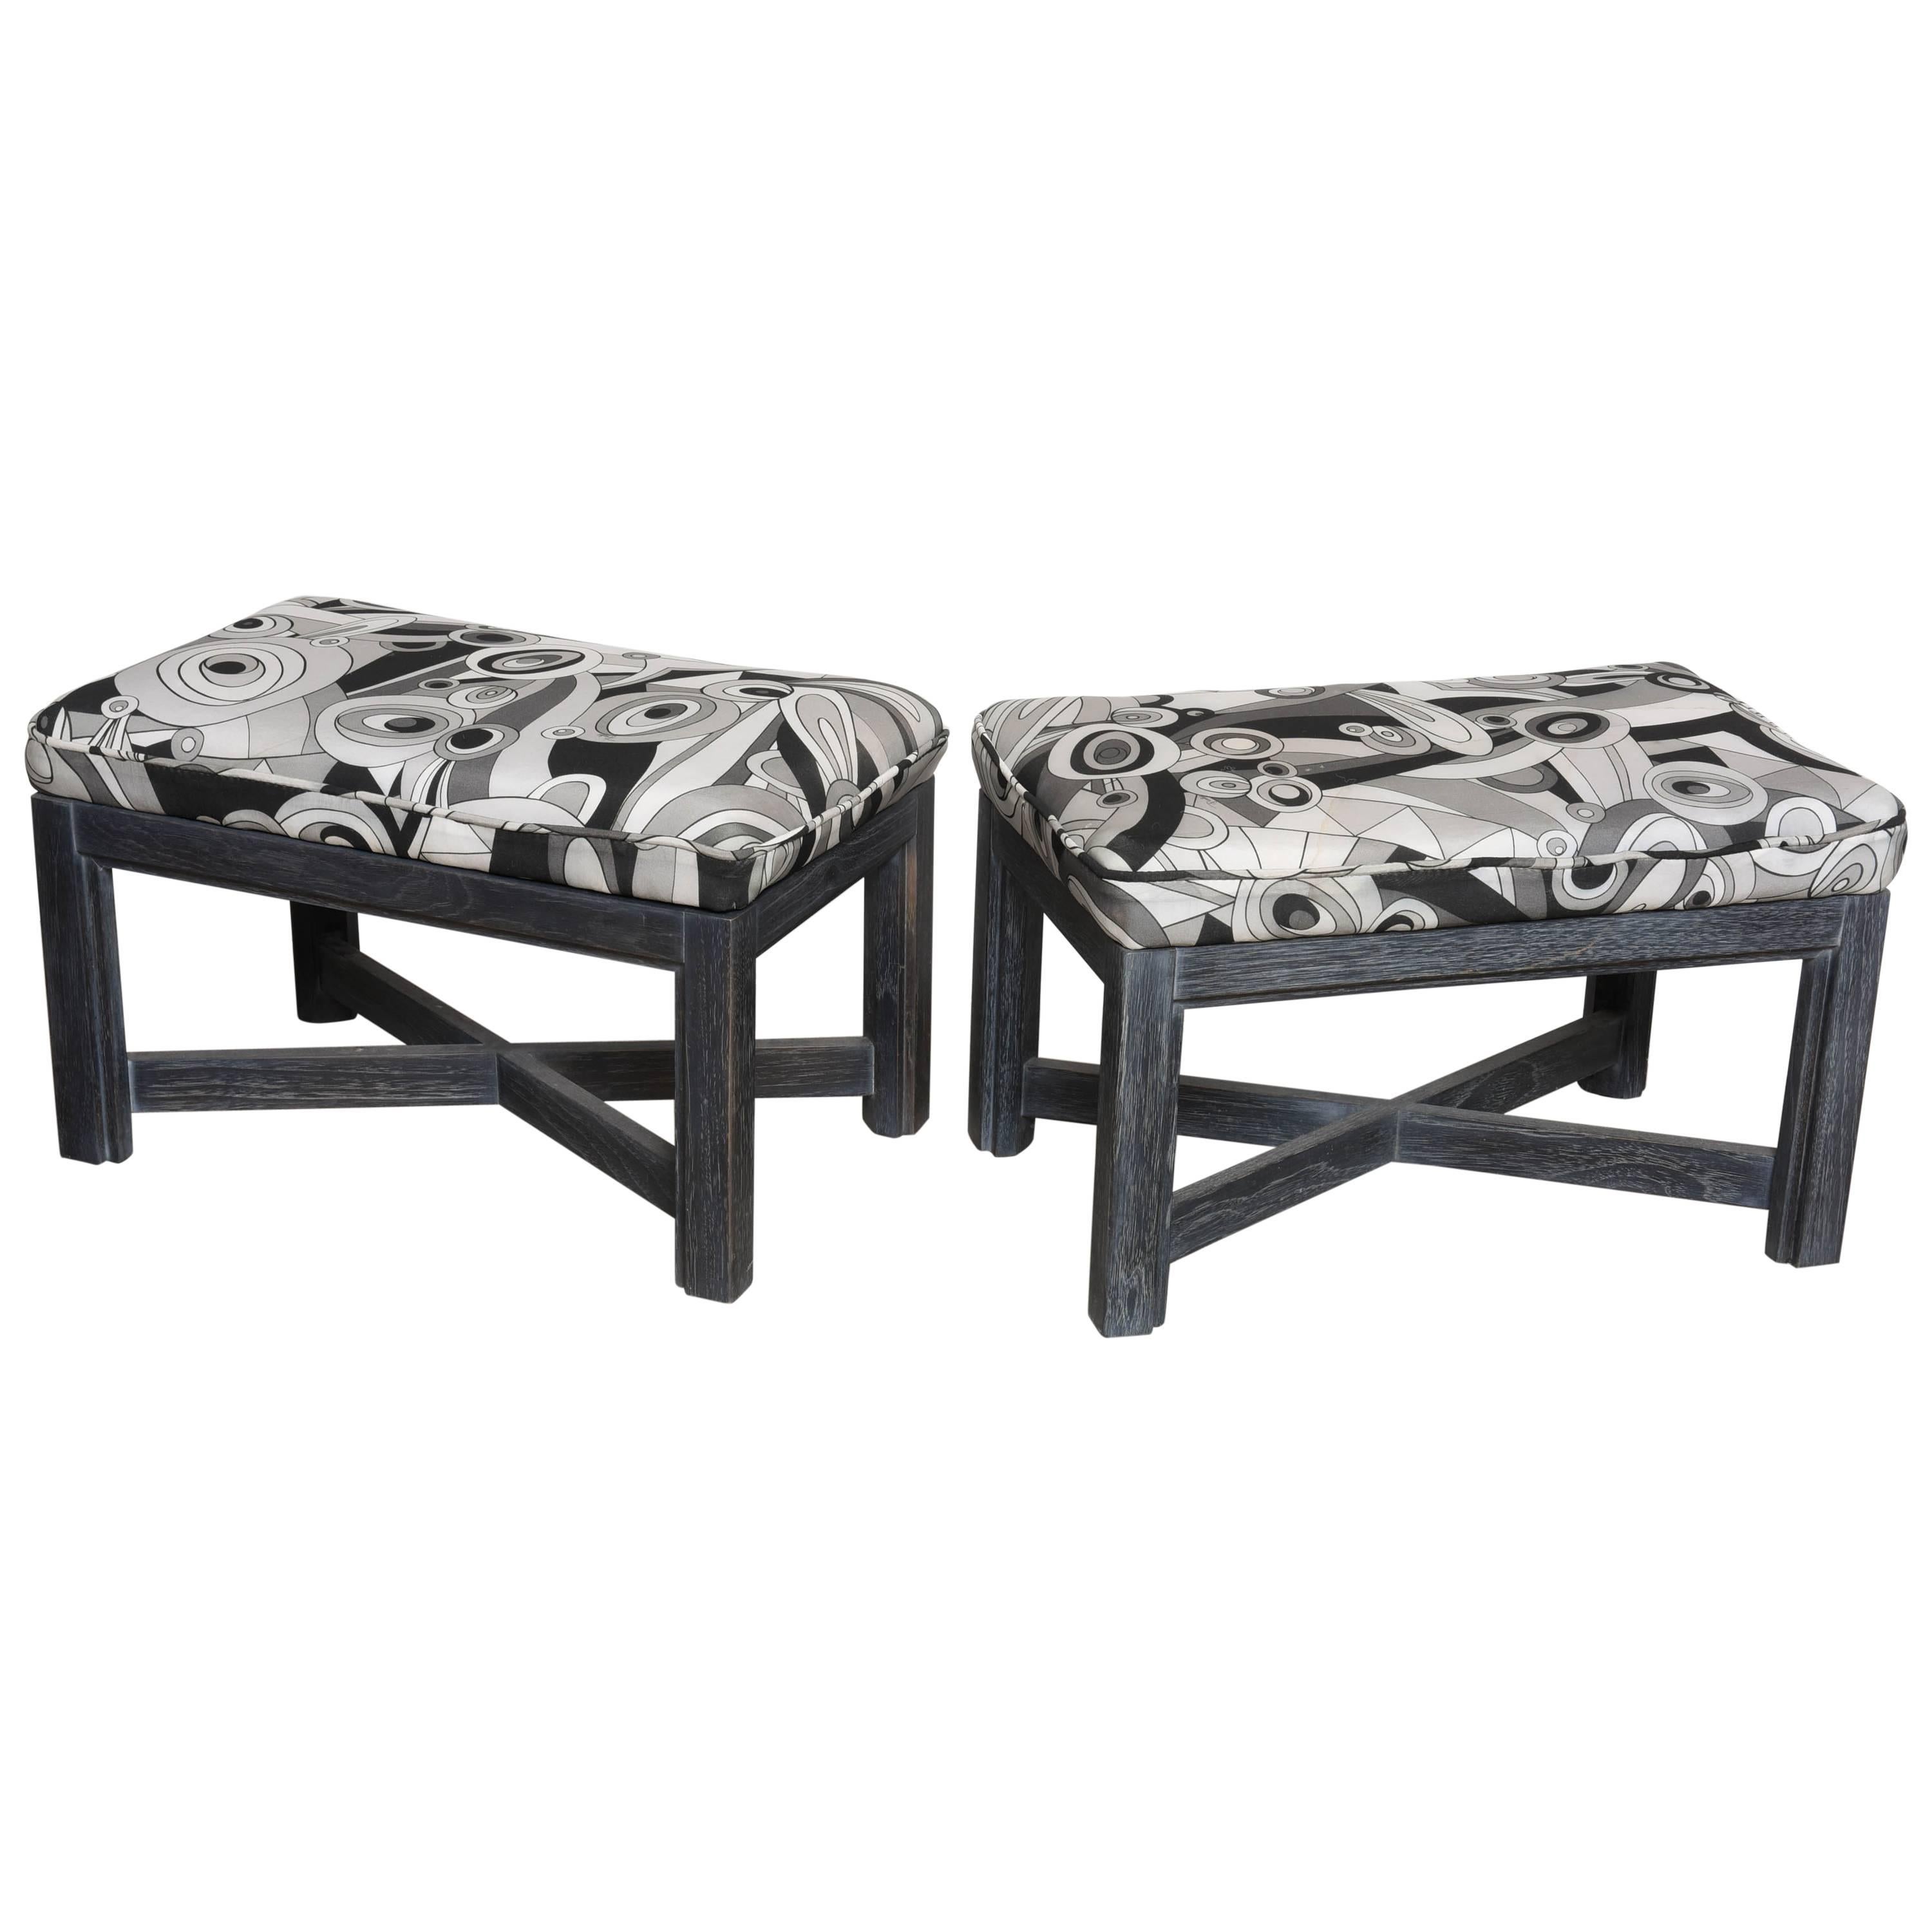 Upholstered Pair of Cerrused Oak X Base Stools  upholstered in Pucci Fabric